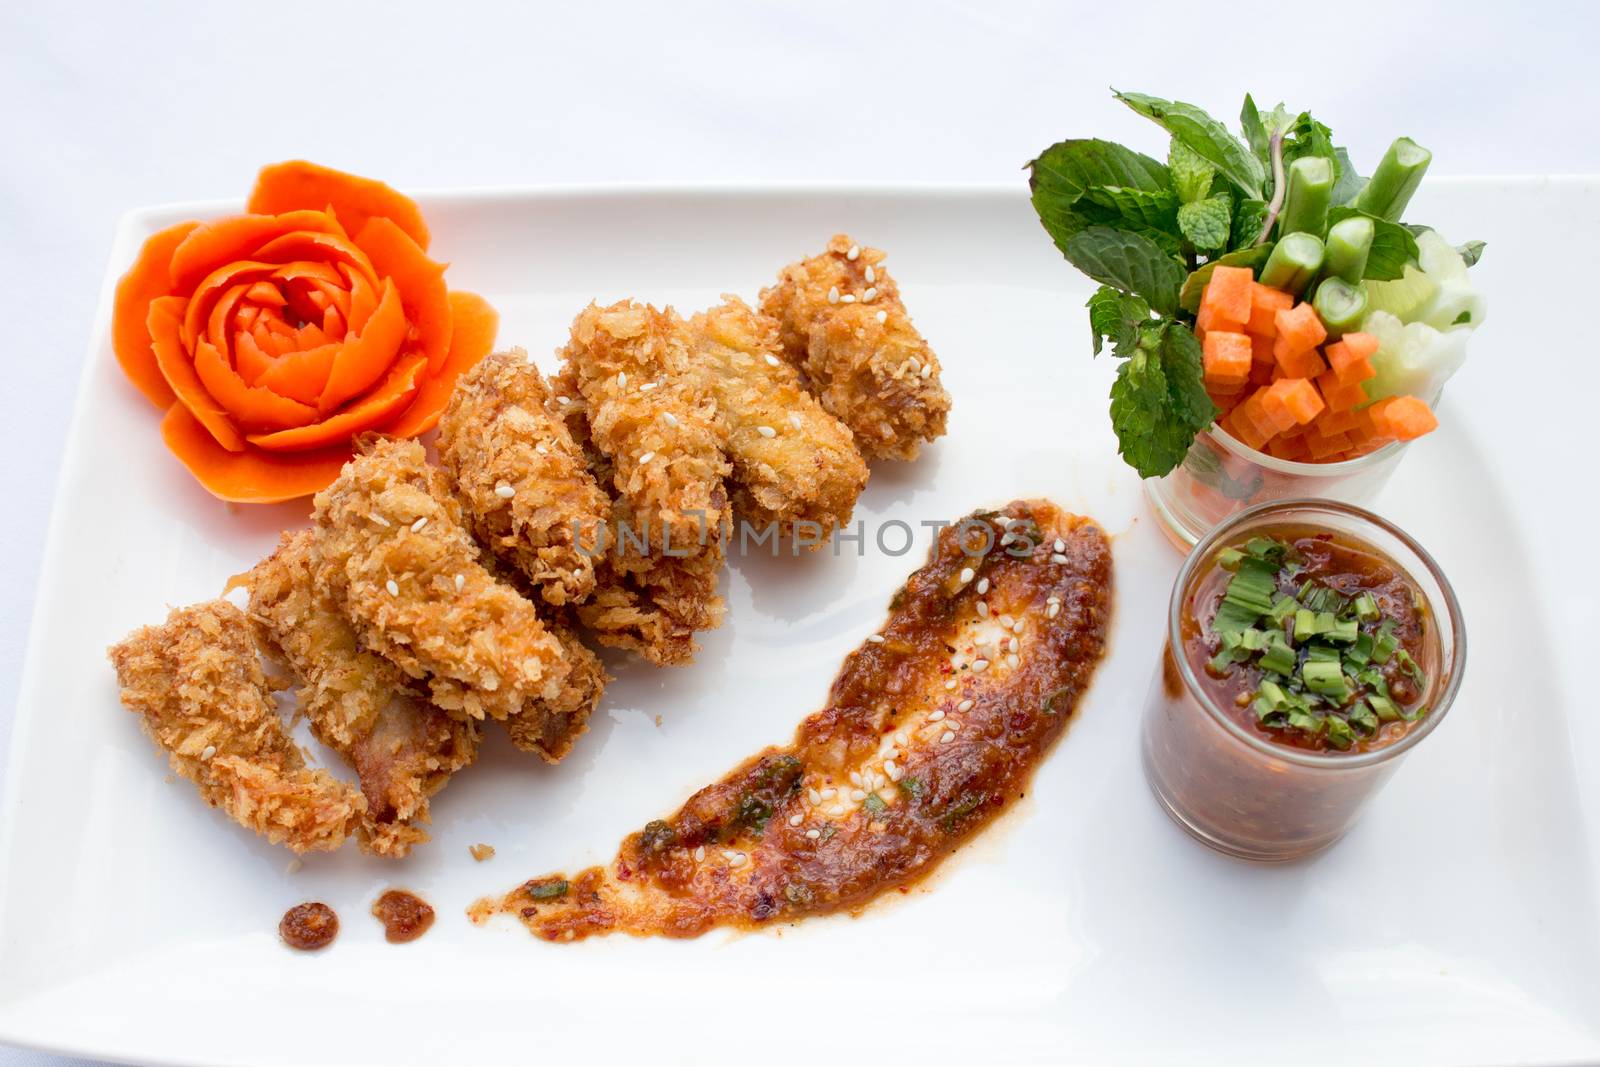 Tasty fried chicken and vegetable in white plates on white background .